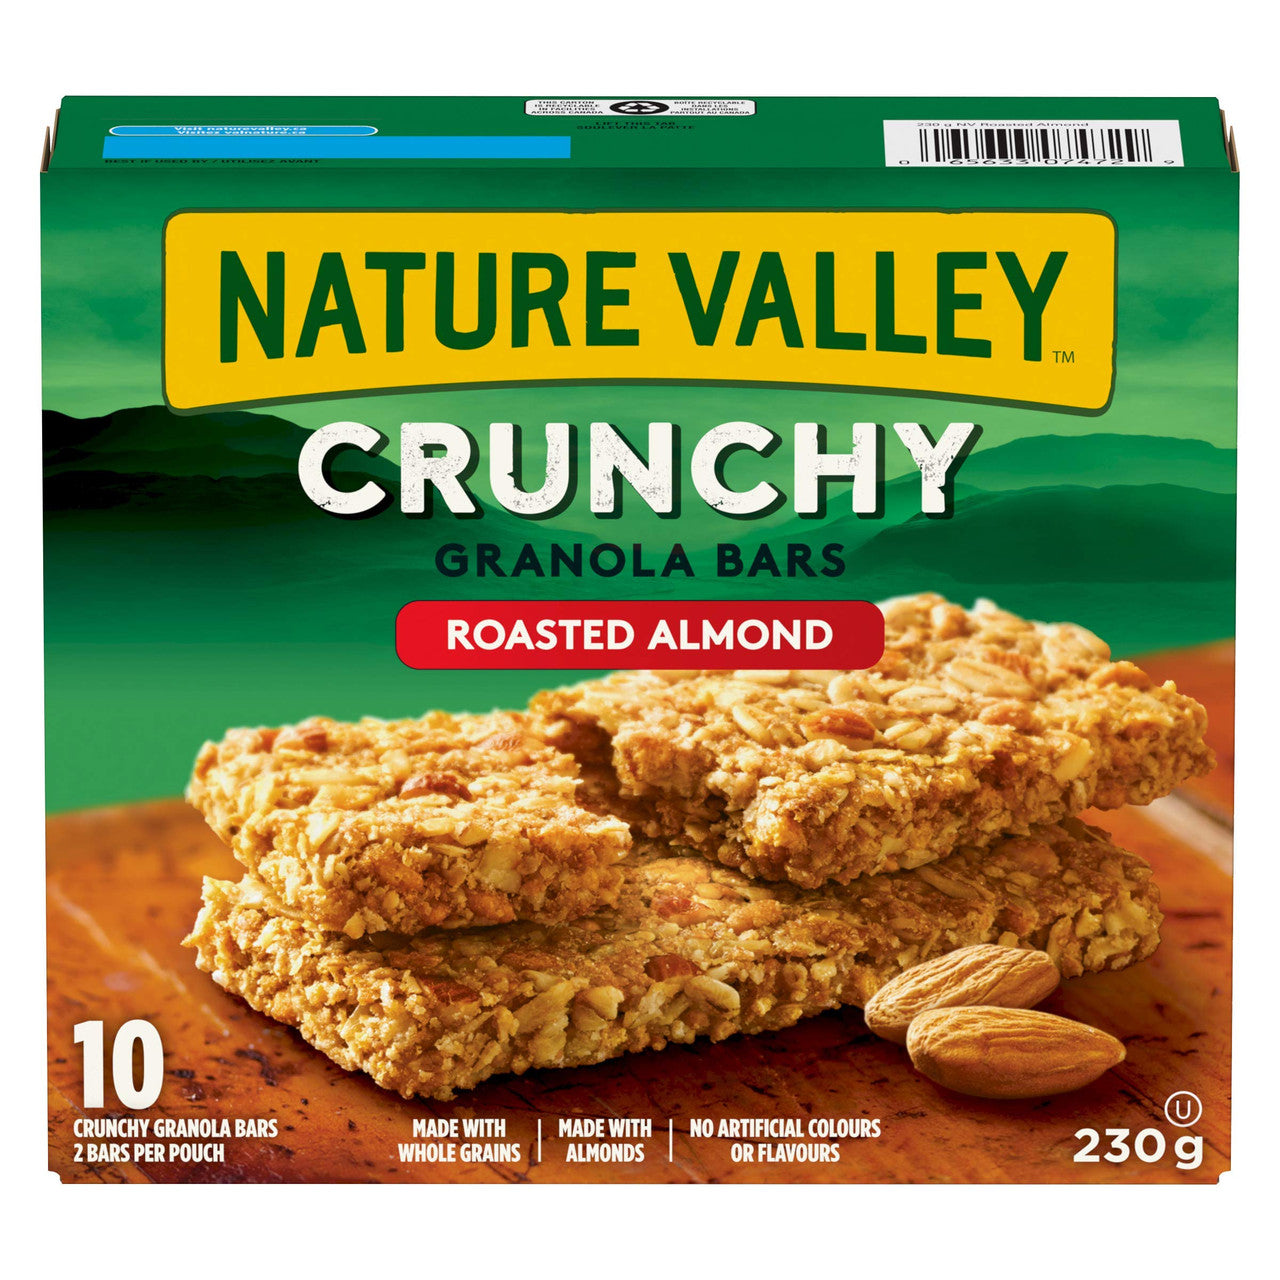 NATURE VALLEY Crunchy Roasted Almond Granola Bars, 10-Count, Box, 230g/8.1 oz., {Imported from Canada}